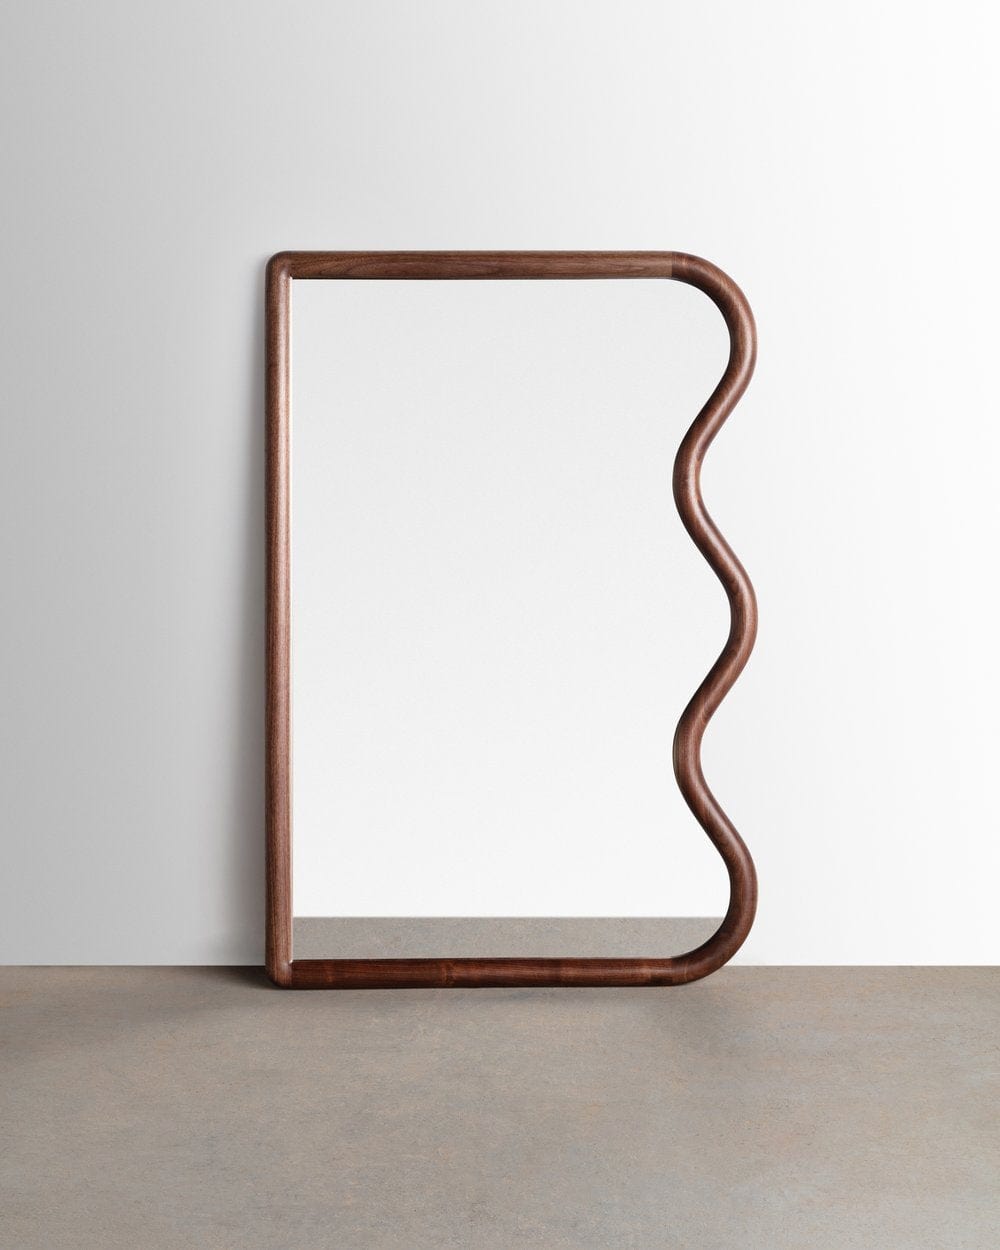 SQUIGGLE MIRROR | SMALL BY CHRISTOPHER MIANO